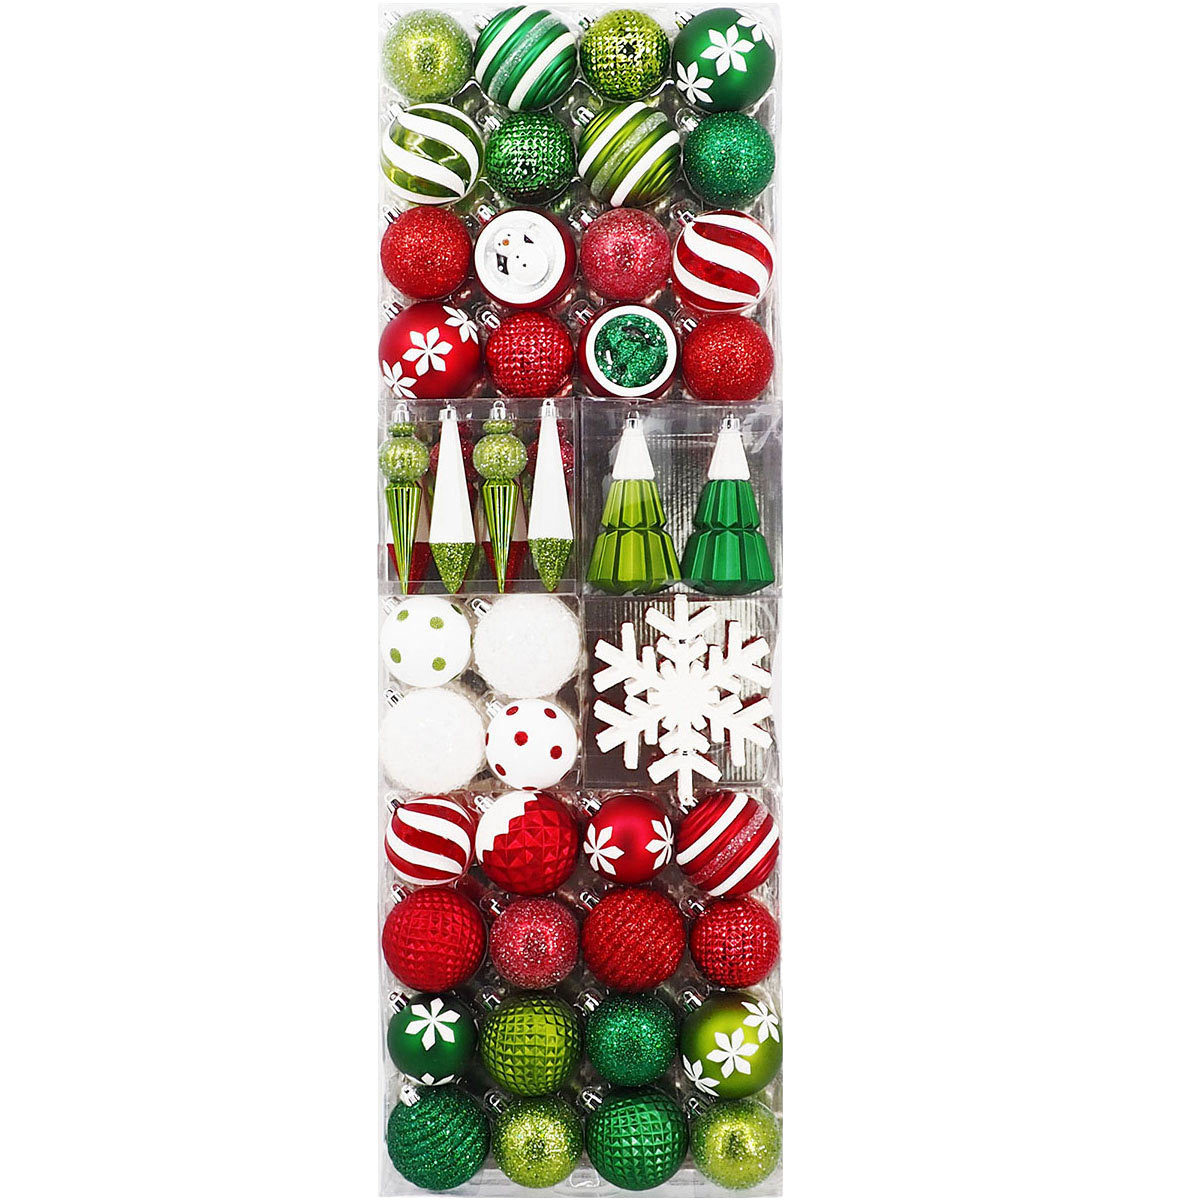 Shatter Resistant 52 Piece Ornament Set in Red and Green